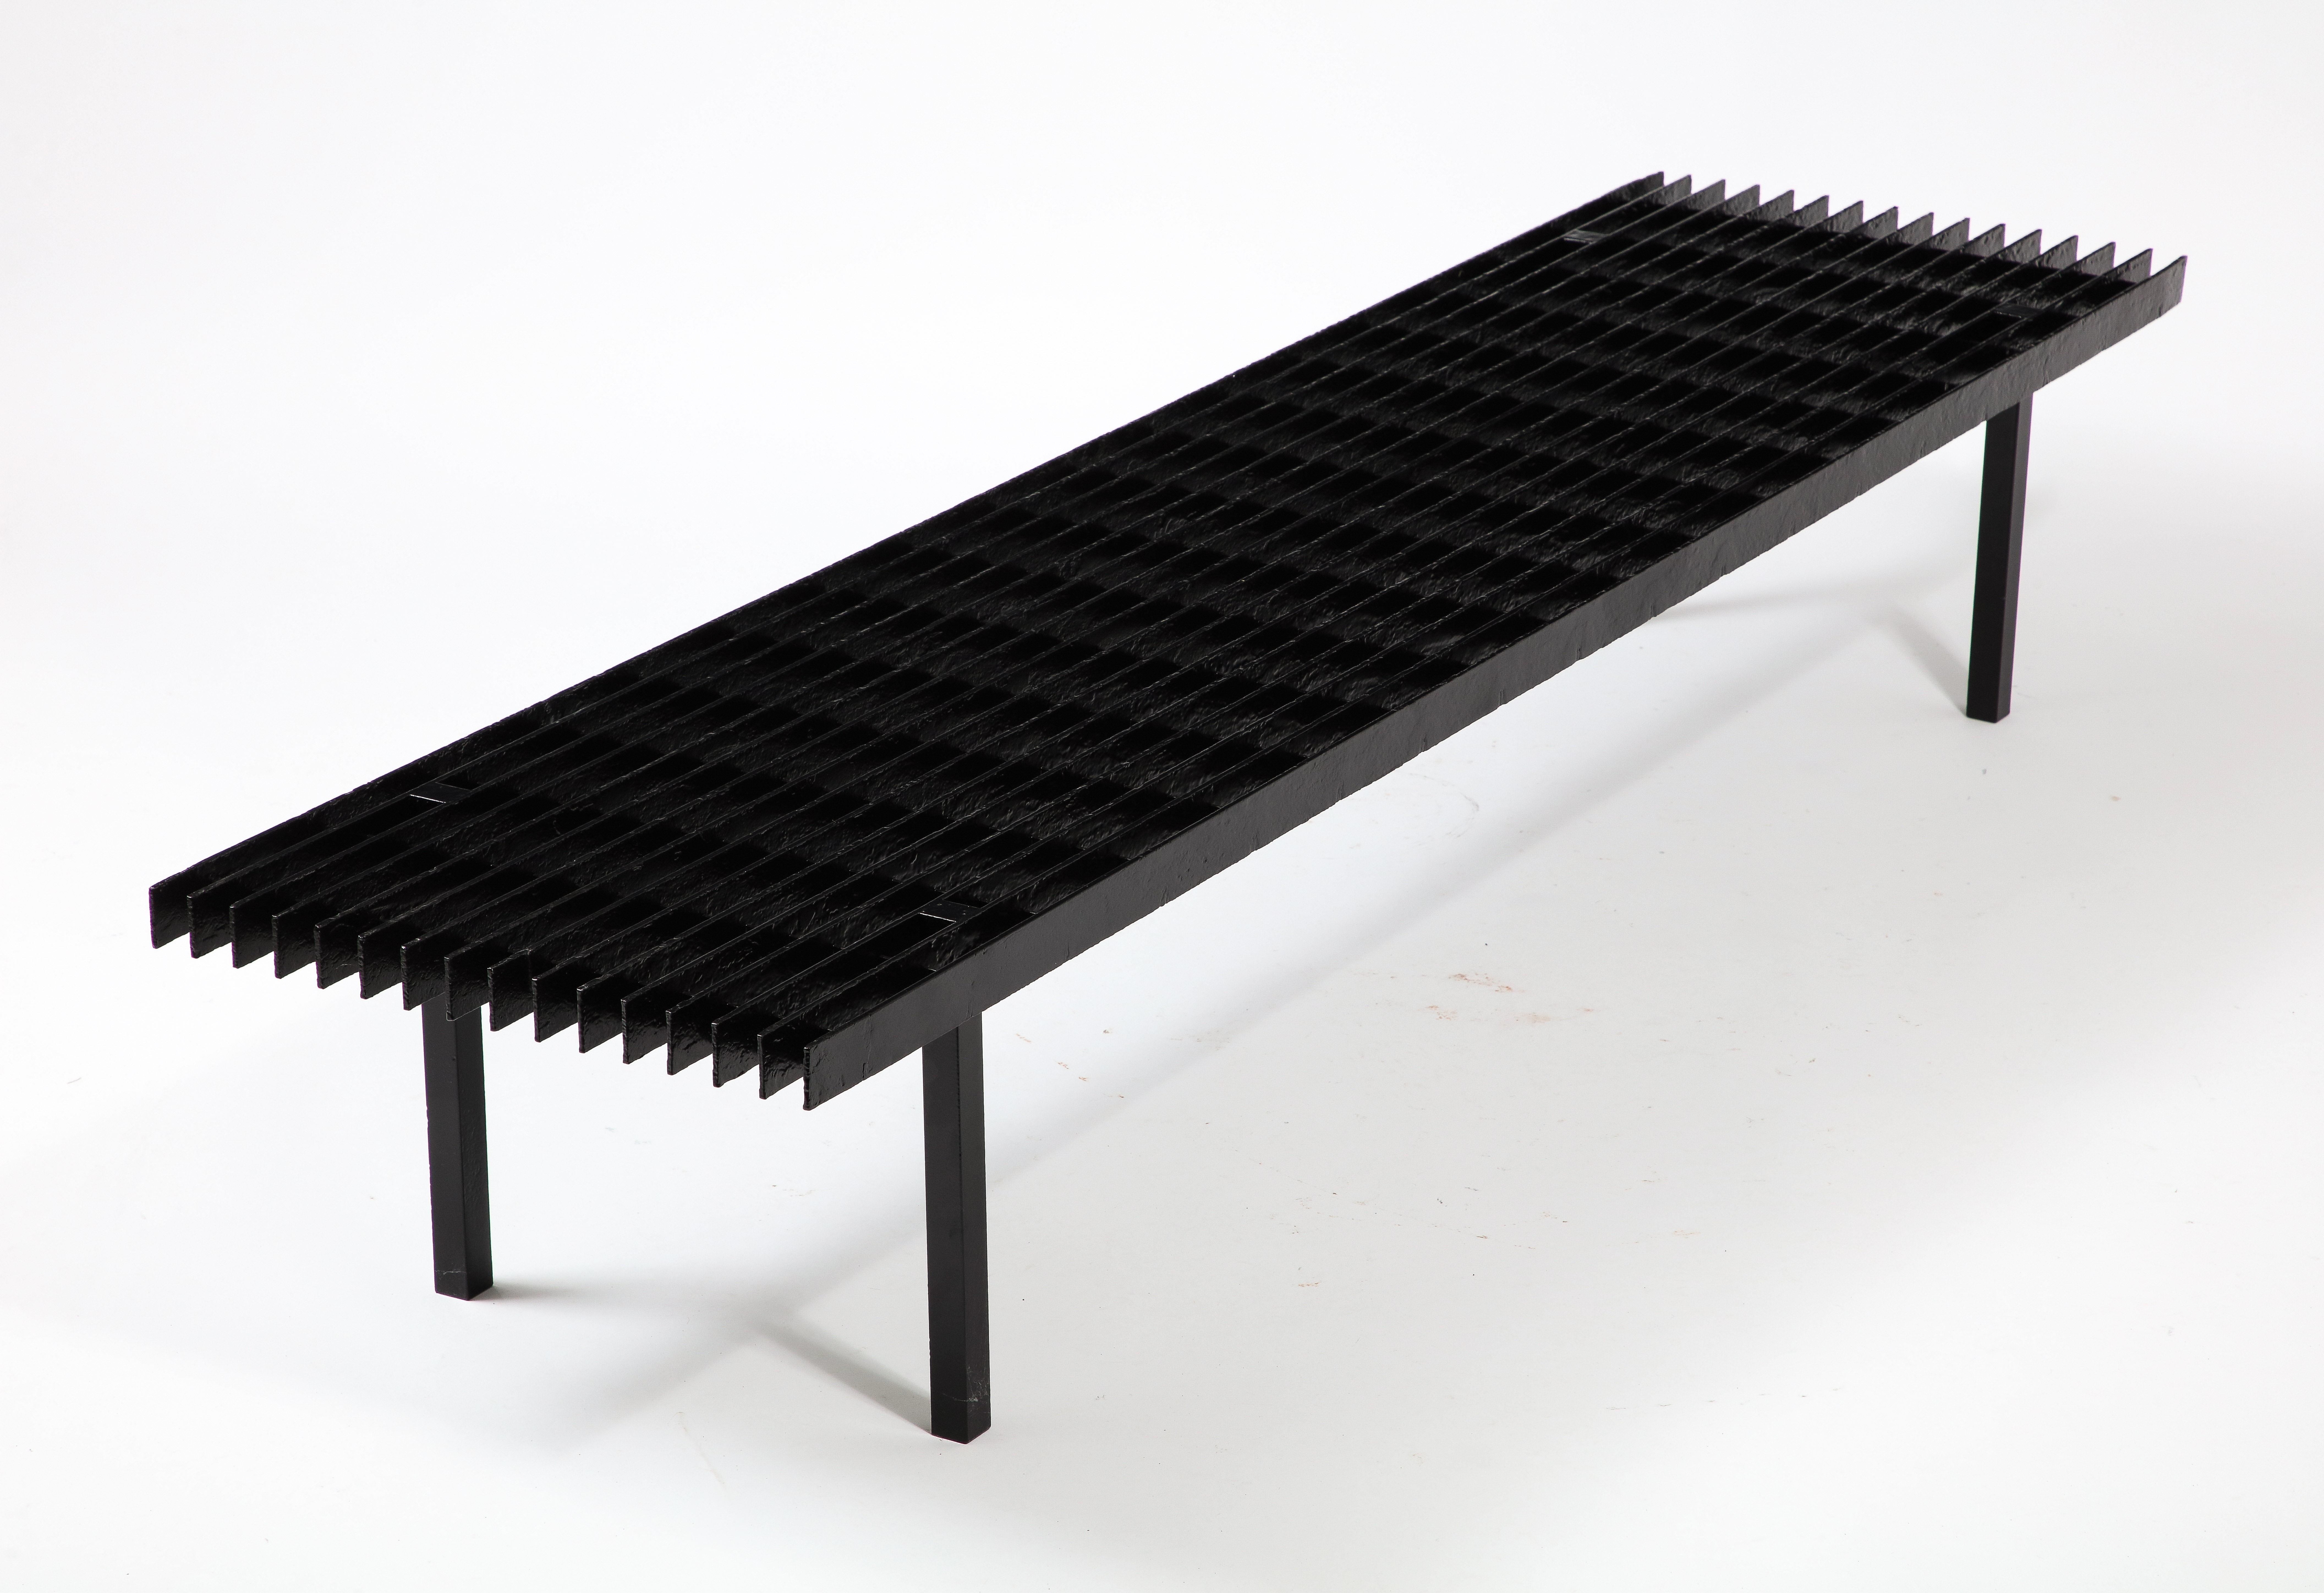 Black Enameled Steel Slat Bench or Low Coffee Table, USA 1970's For Sale 2